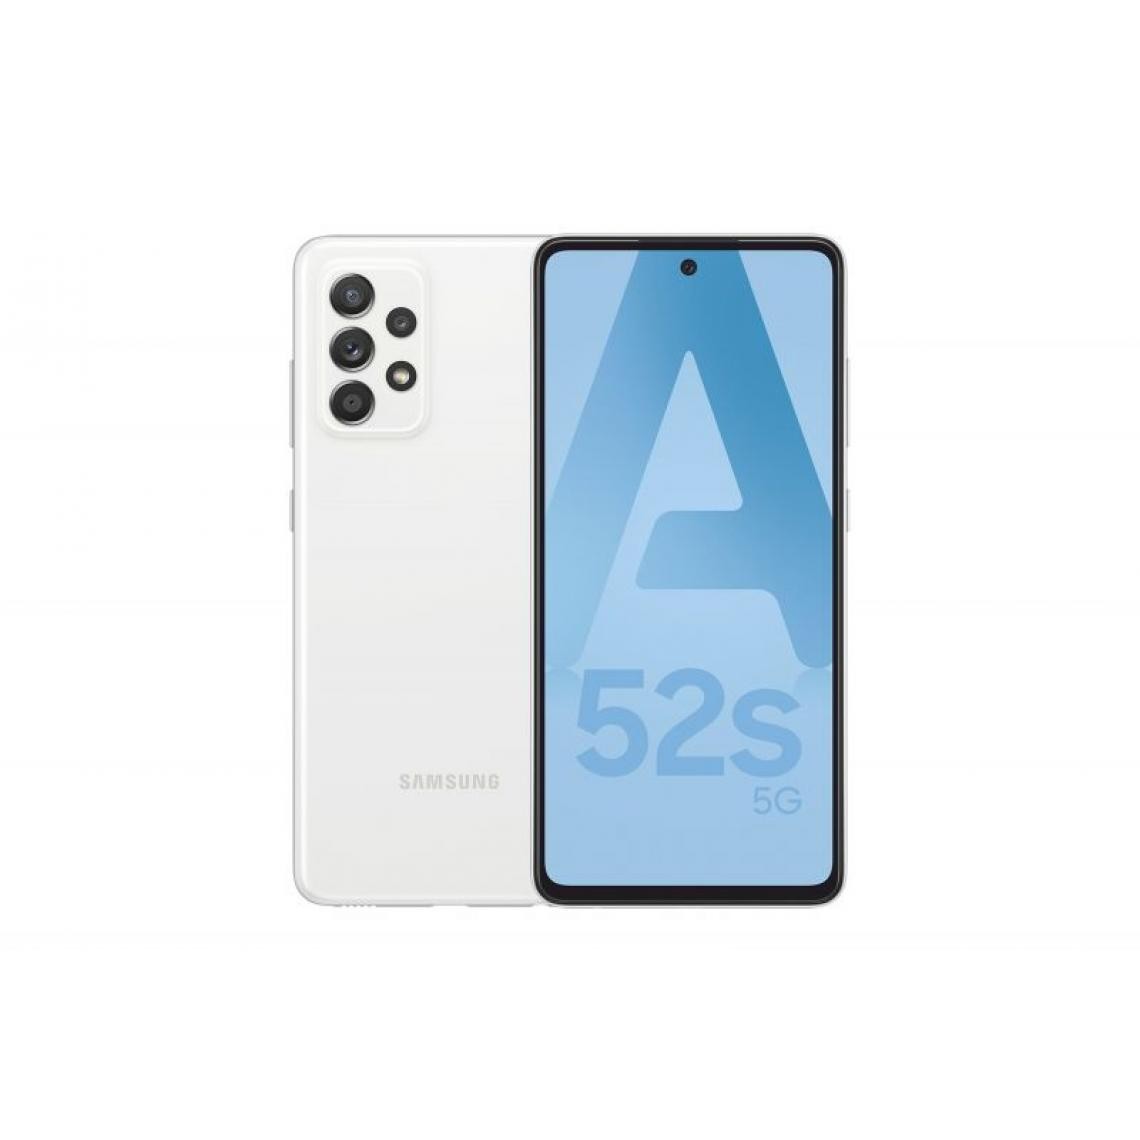 Inconnu - Samsung Galaxy A52s 5G SM-A528B 16,5 cm (6.5``) Double SIM Android 11 USB Type-C 6 Go 128 Go 4500 mAh Blanc - Smartphone Android